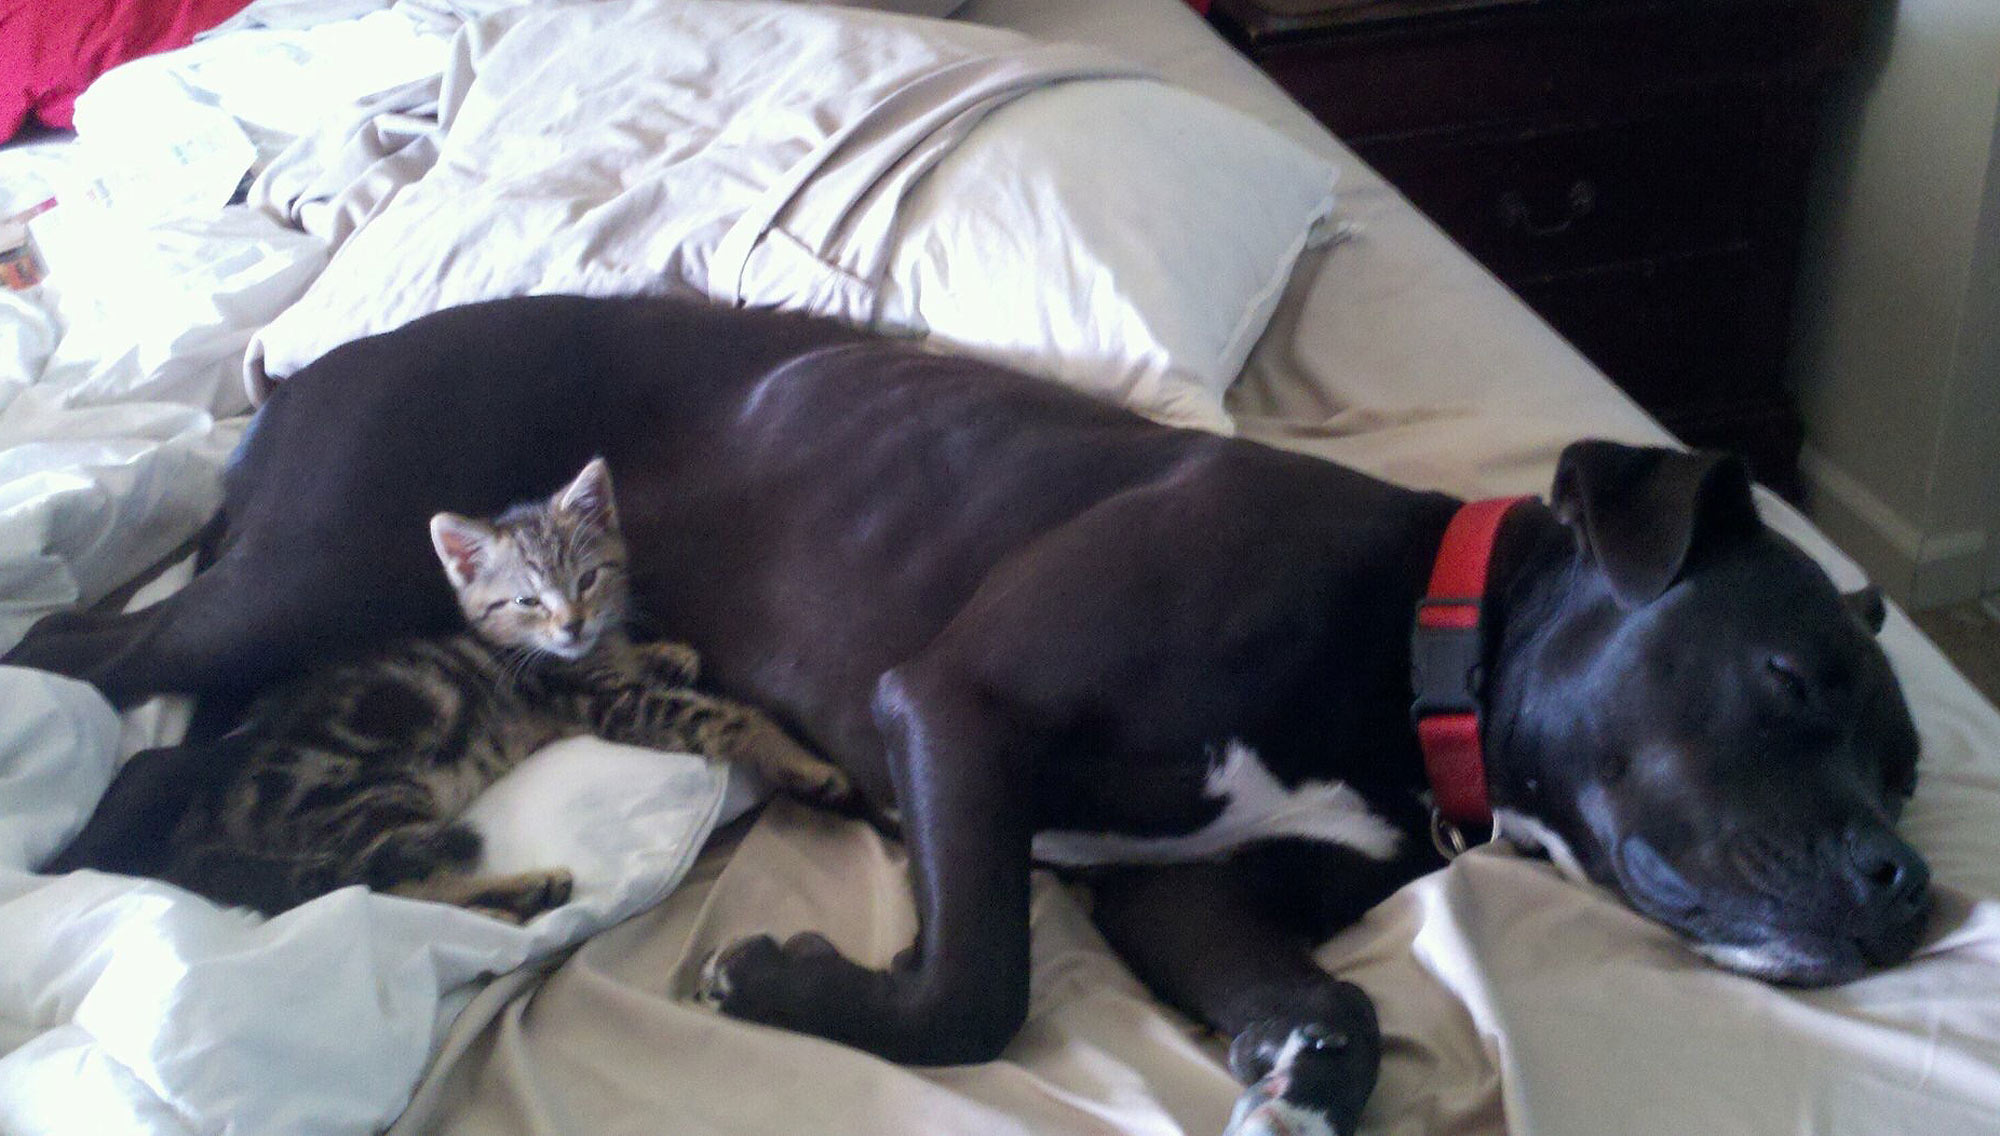 BooBoo the cat’s and her pit bull friend